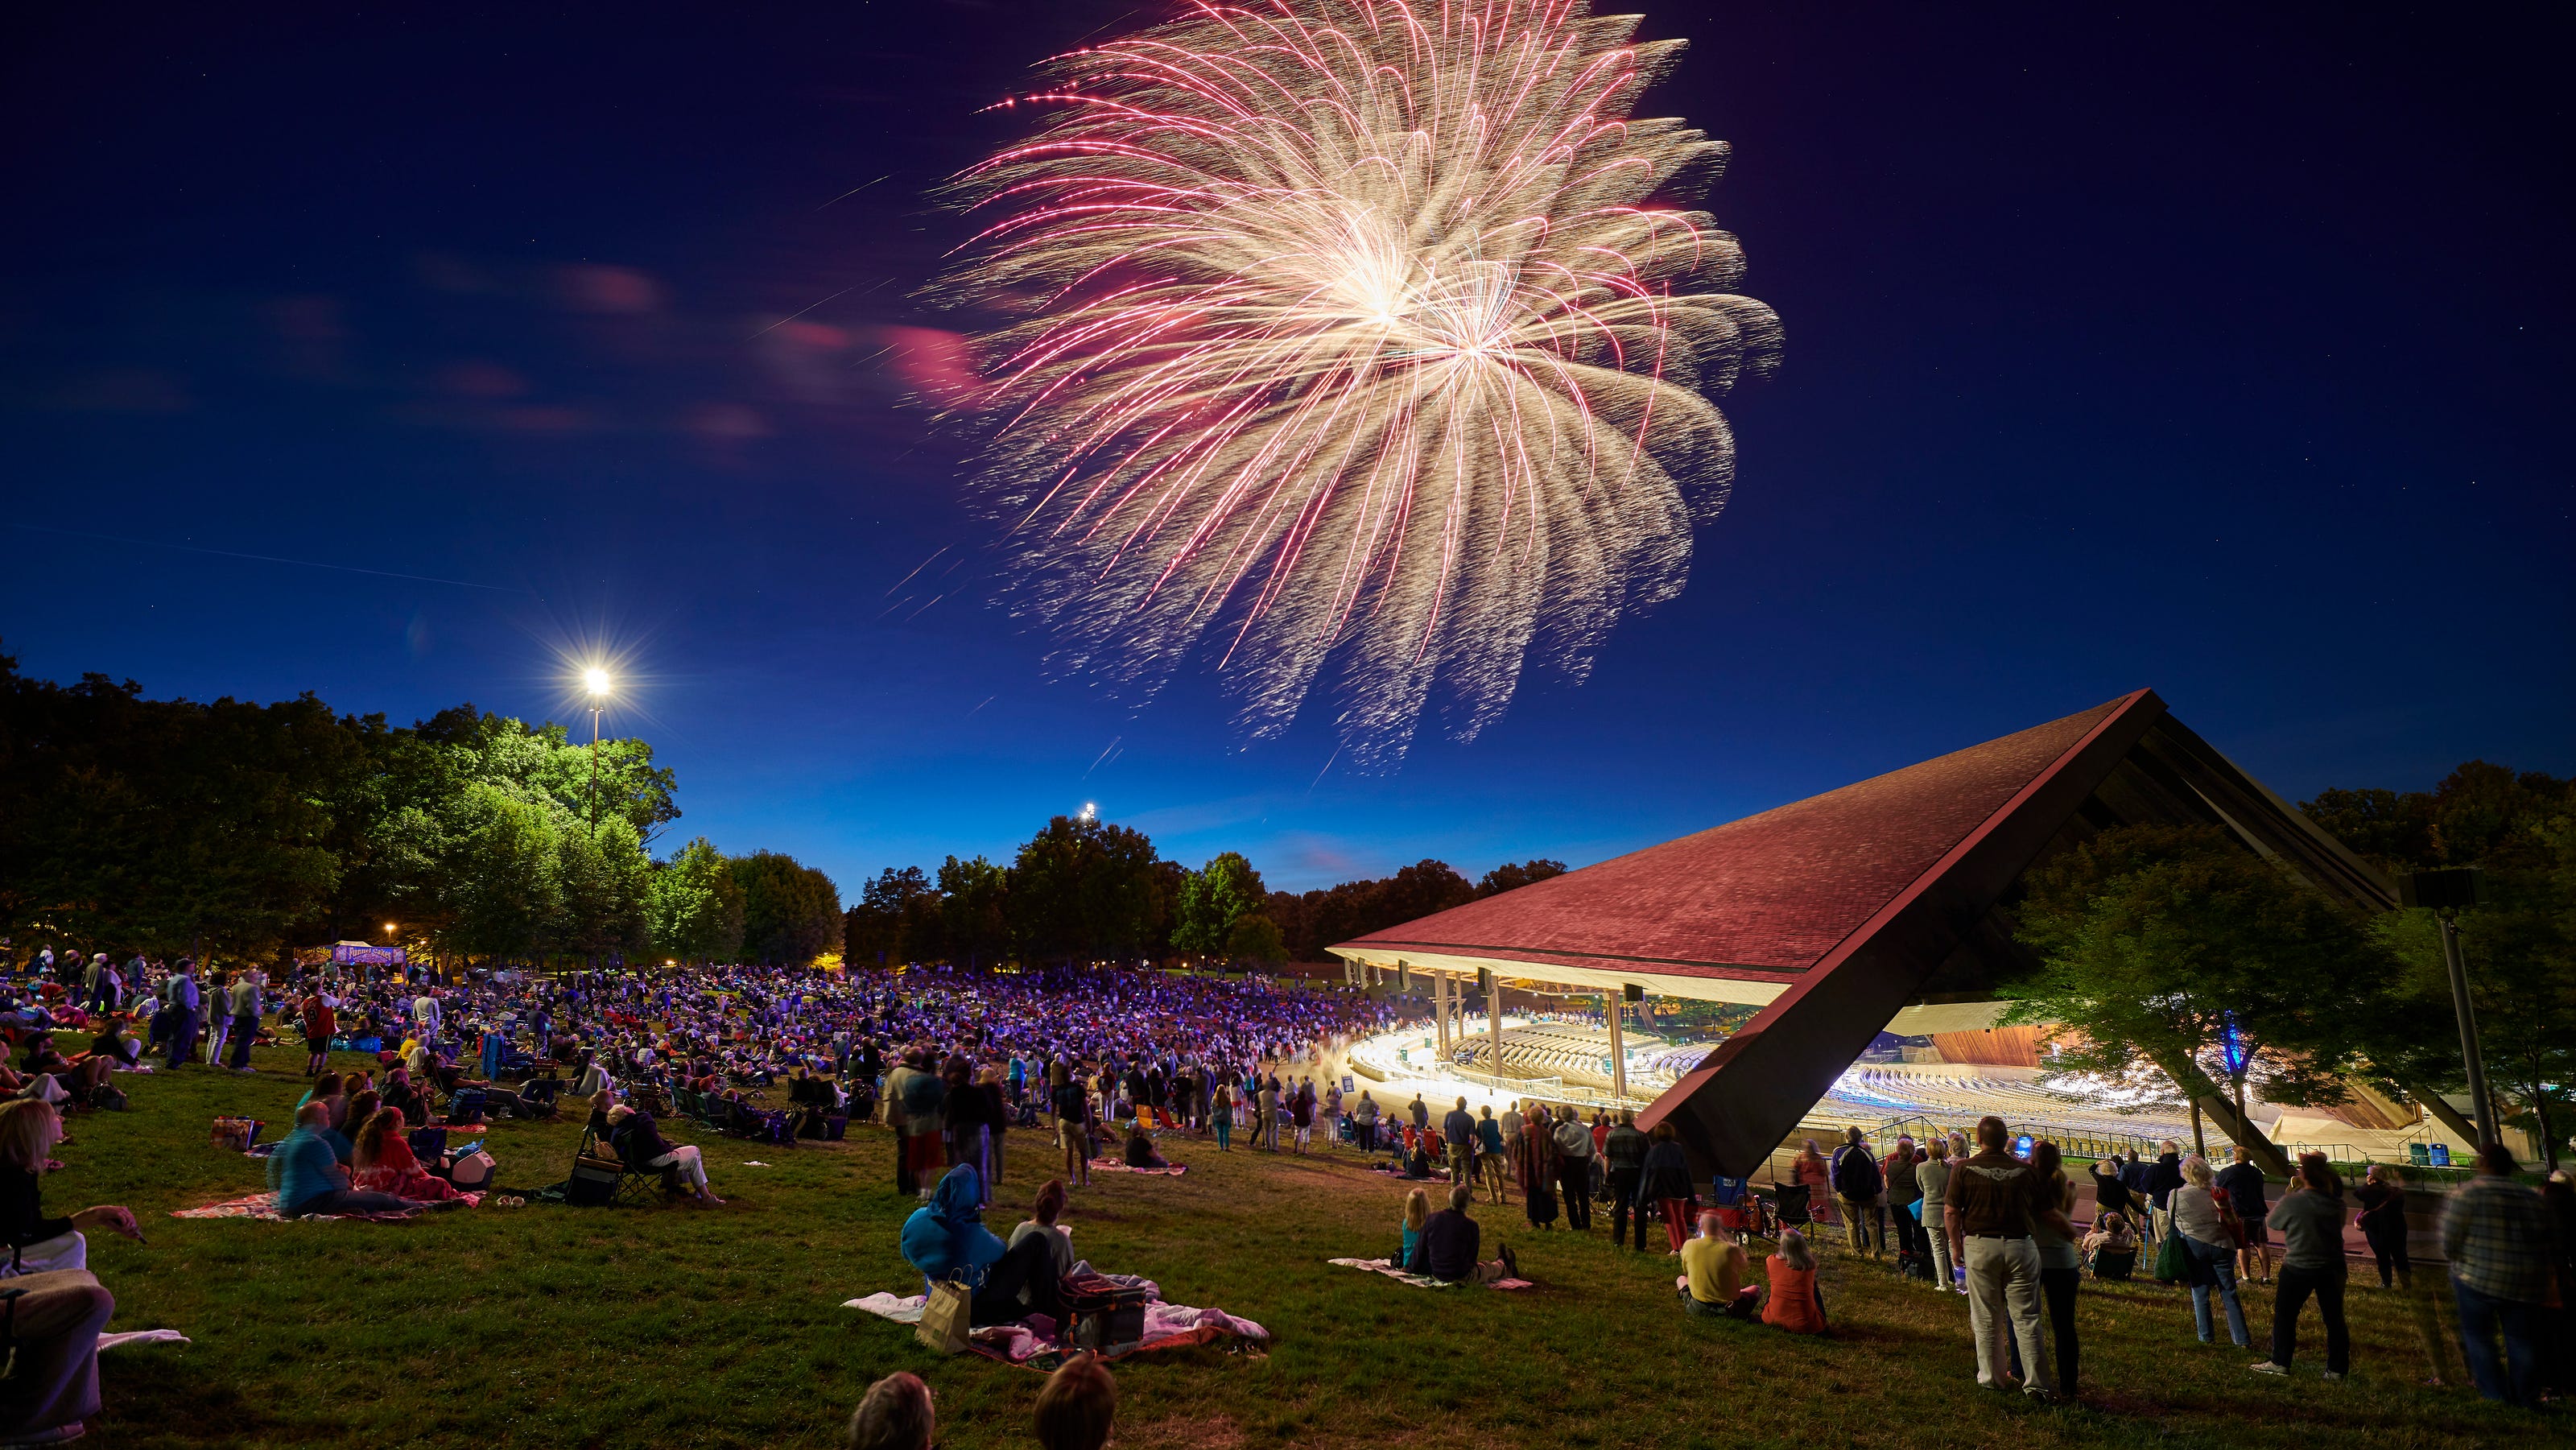 Cleveland Orchestra to kick off Blossom Music Festival July 4 weekend